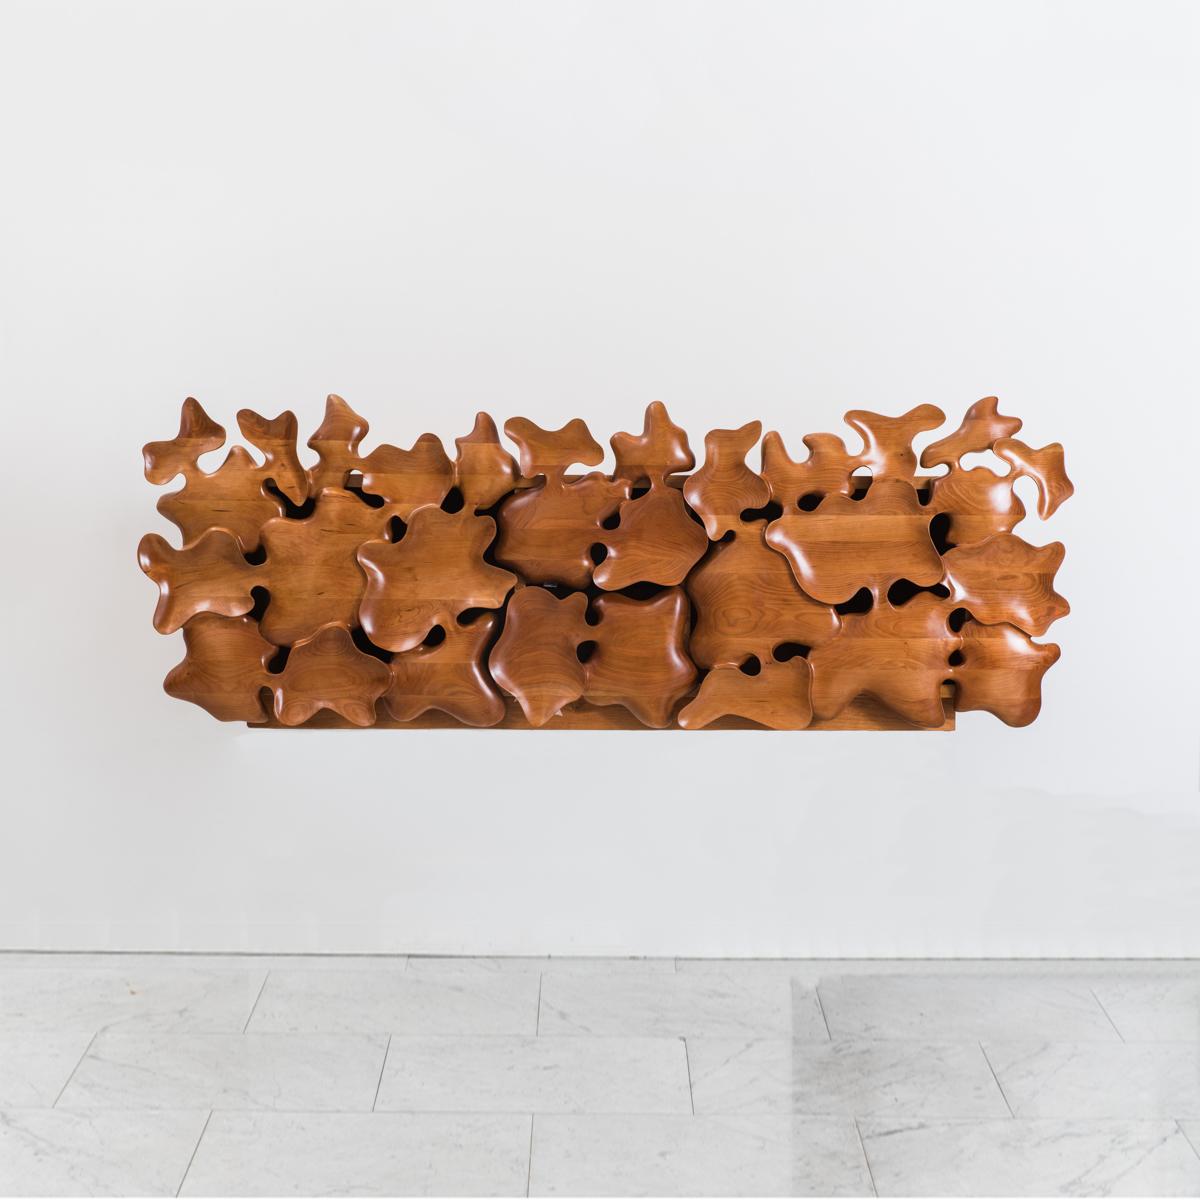 Seoul-based designer Kim Yunhwan’s remarkable hand carved furniture began as series of small objects – trays, vessels, bowls – that had, what he calls, “unintended shapes.” Scrutinizing these objects, Kim found that by connecting them, reversing